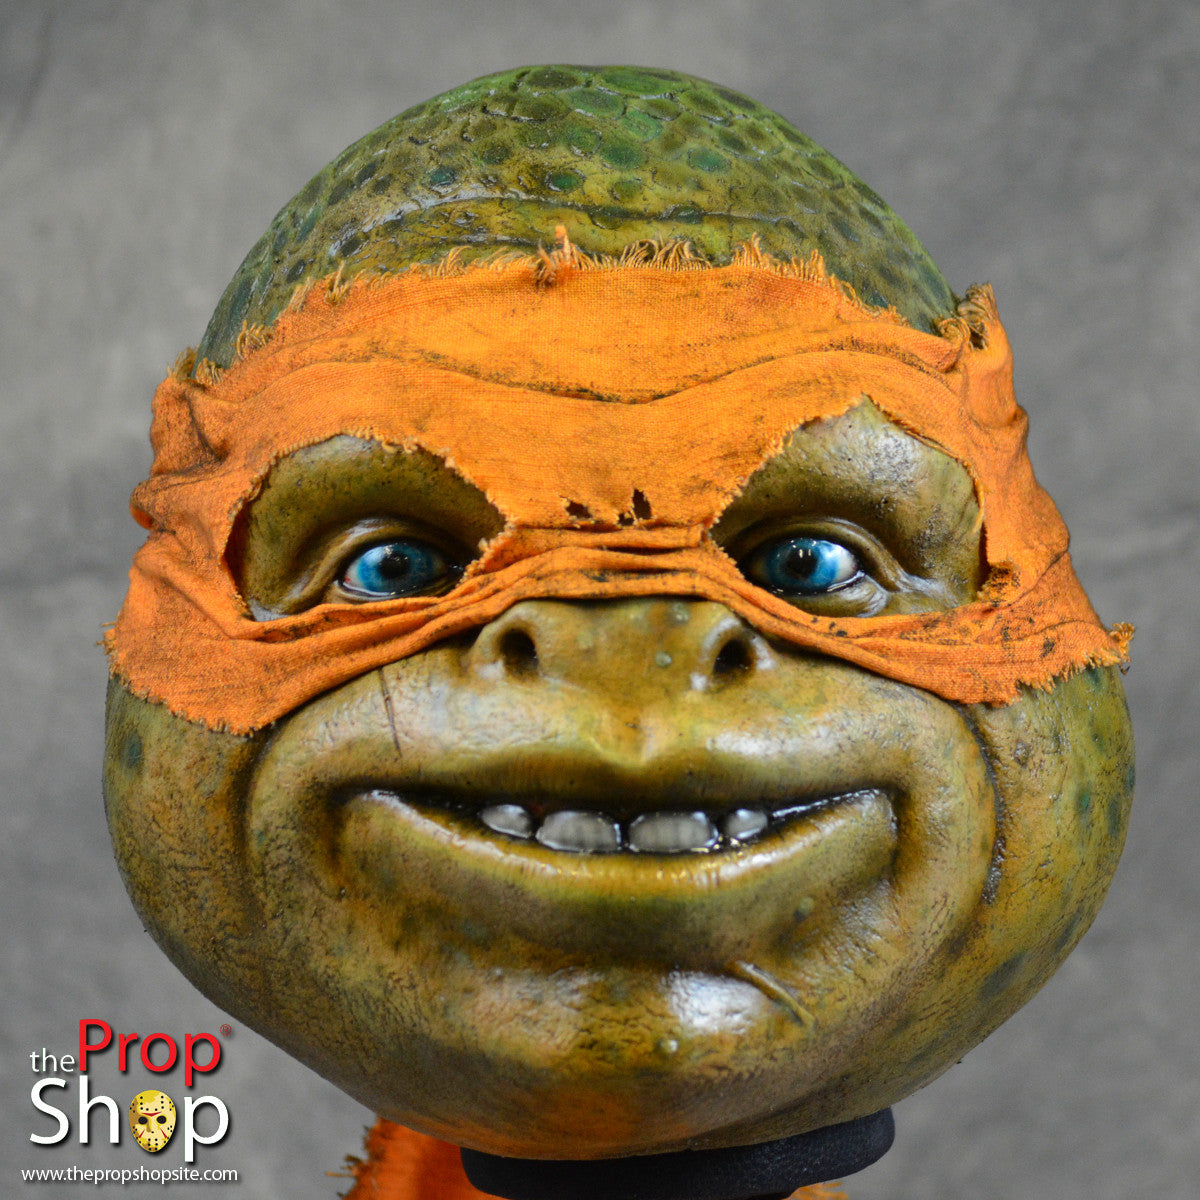 orange-movie-turtle-mask-2014-the-prop-shop-costumes-and-more